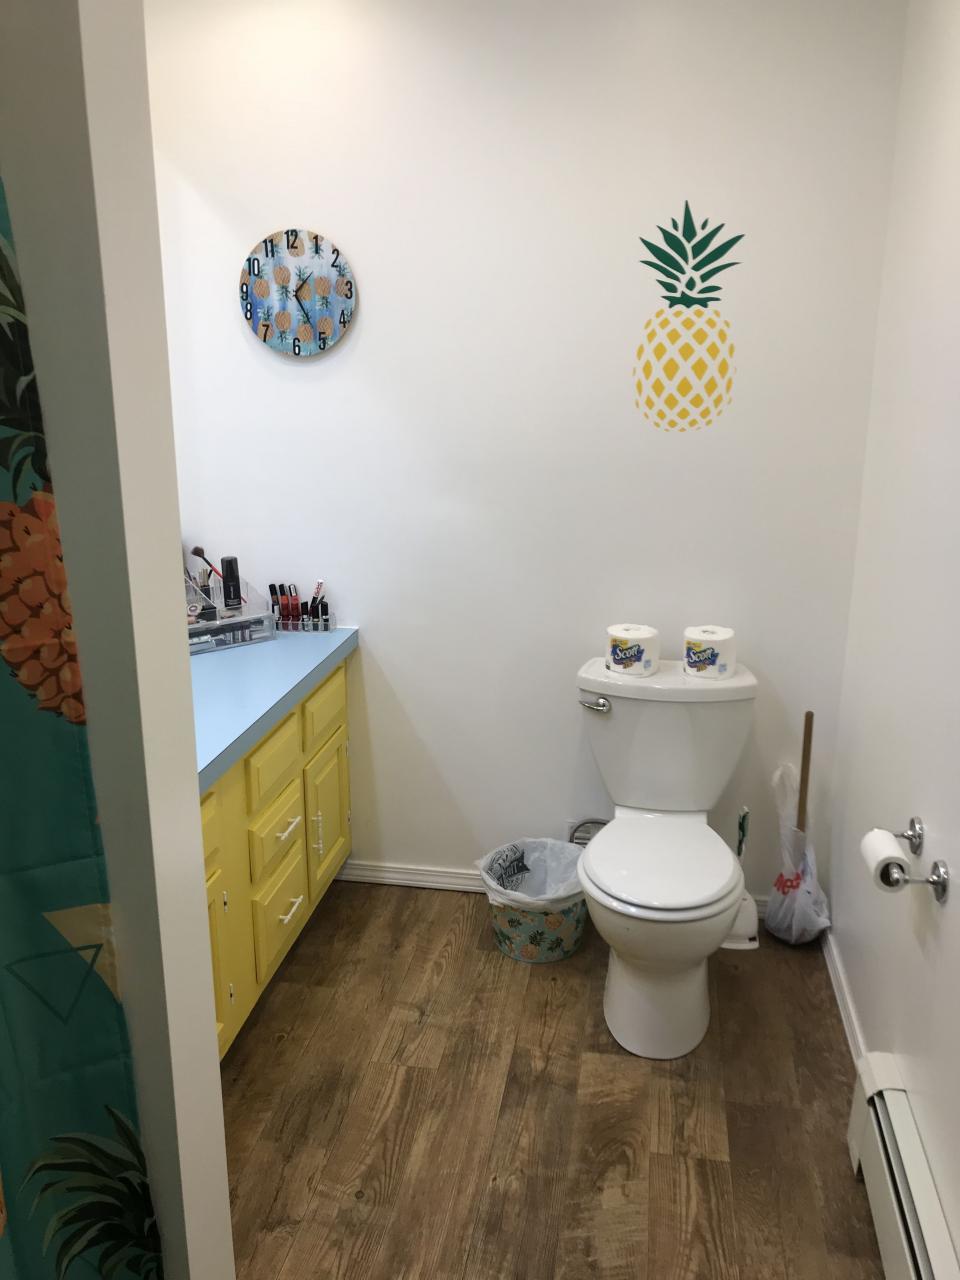 Pineapple Bathroom Decor 2020 Bathroom decor, Bathroom, Home projects